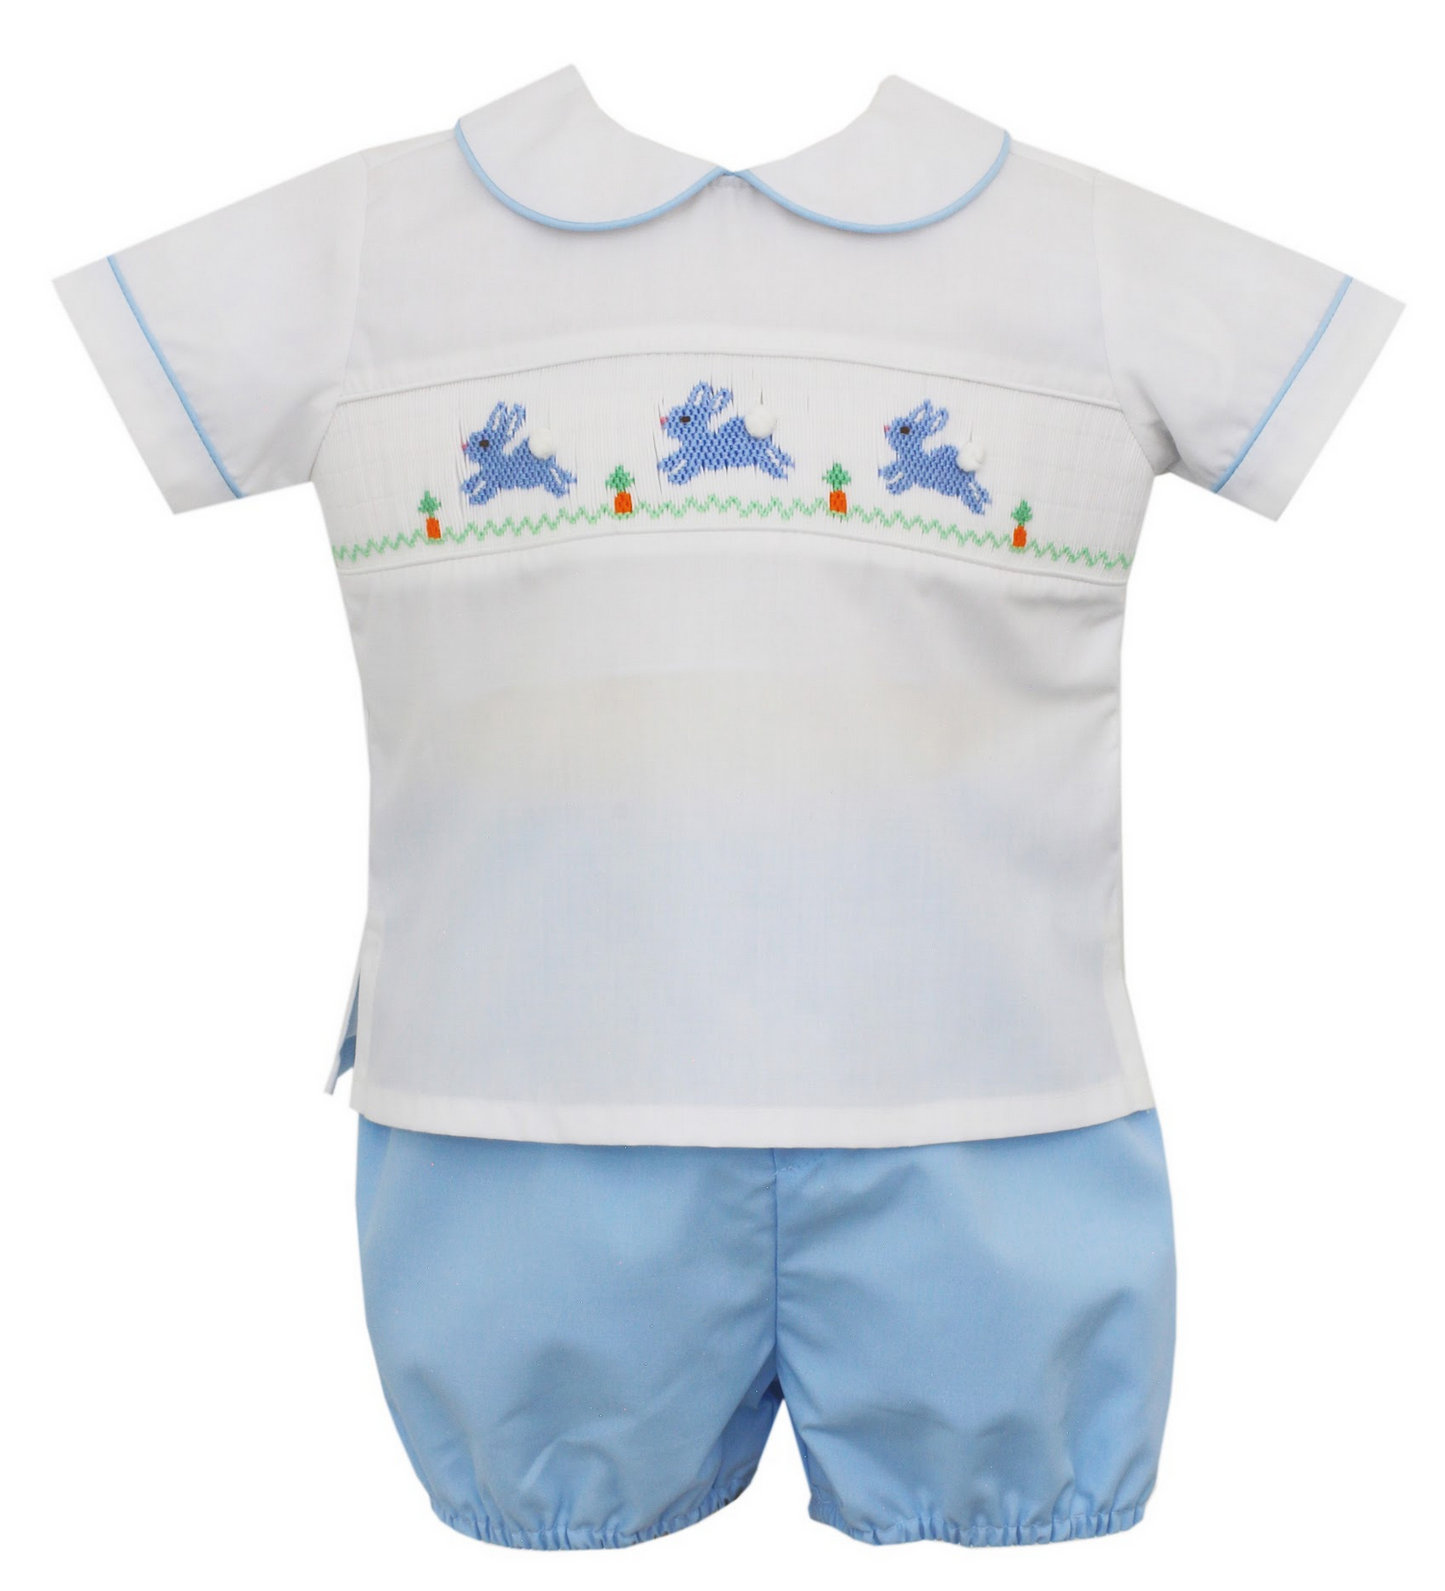 Blue bloomer set with bunnies